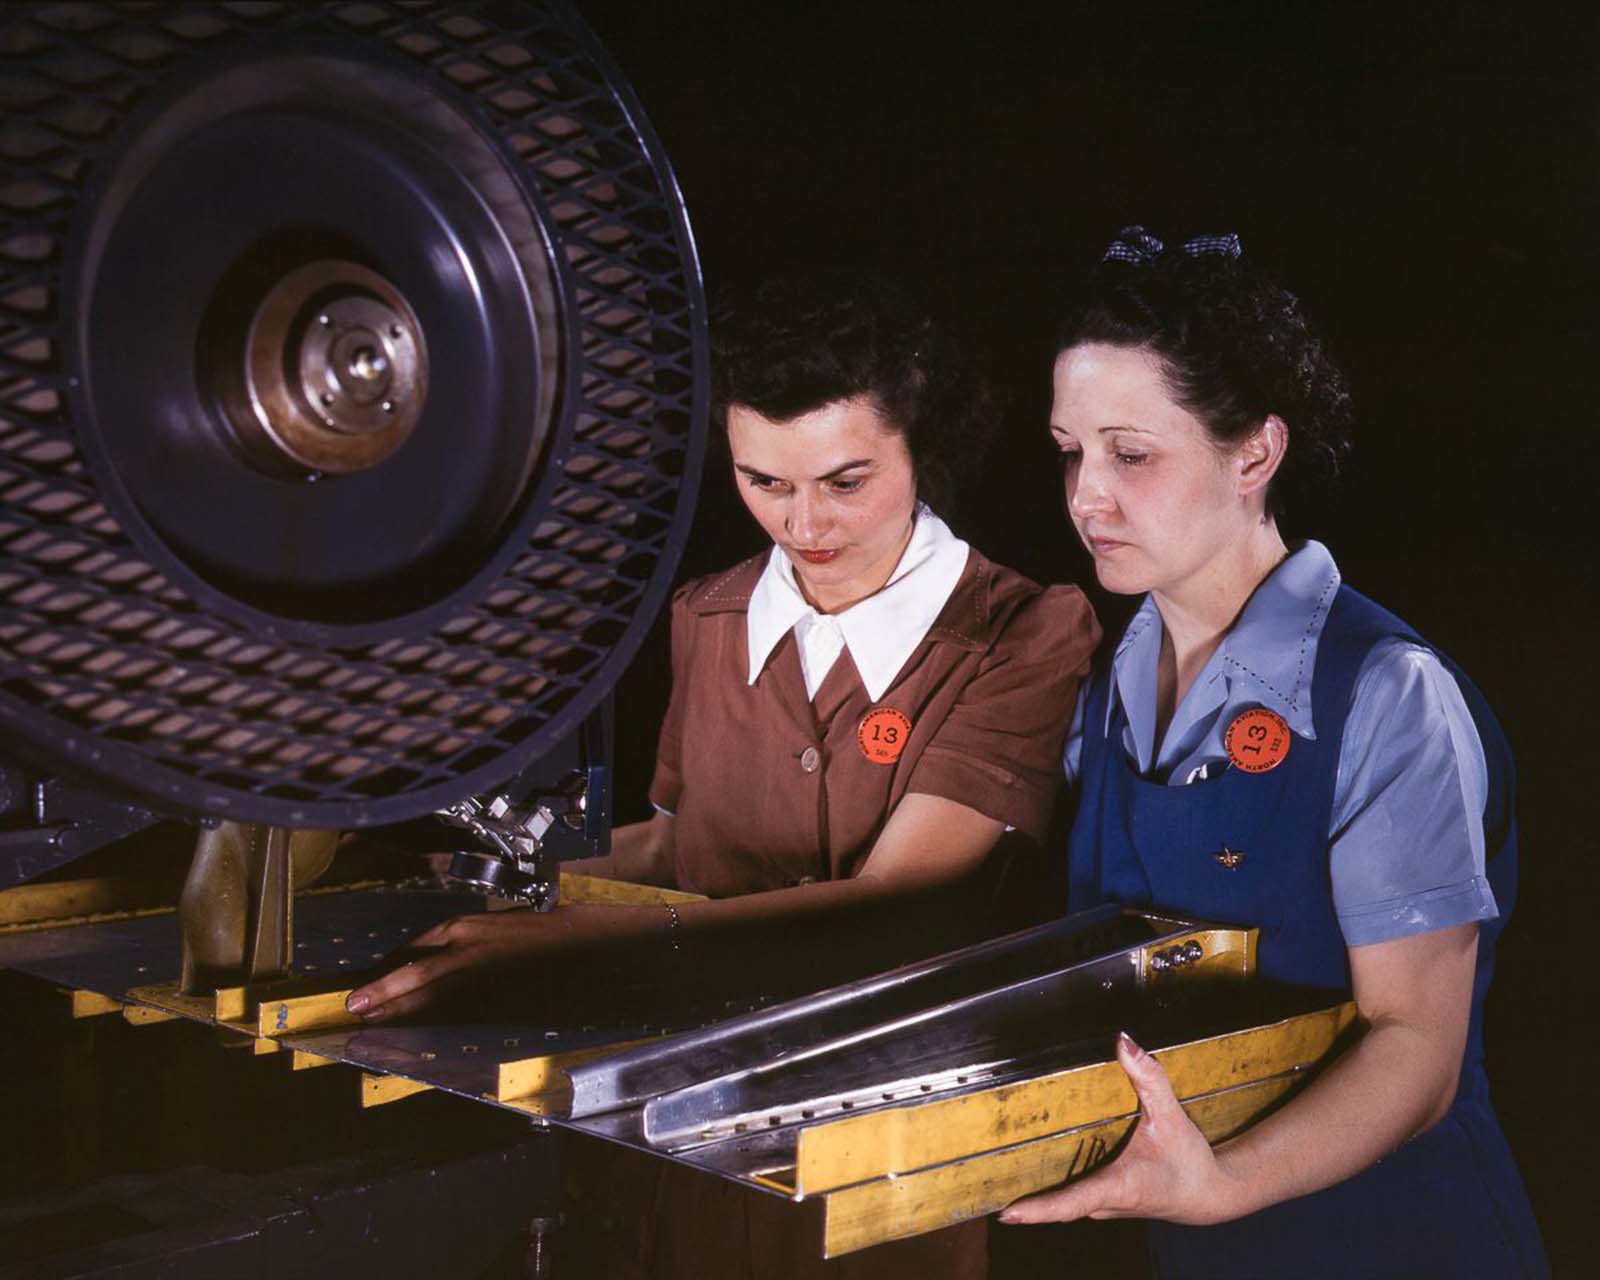 Workers punch rivet holes in a frame member for a B-25 bomber at the North American Aviation plant in Inglewood, California, 1942.